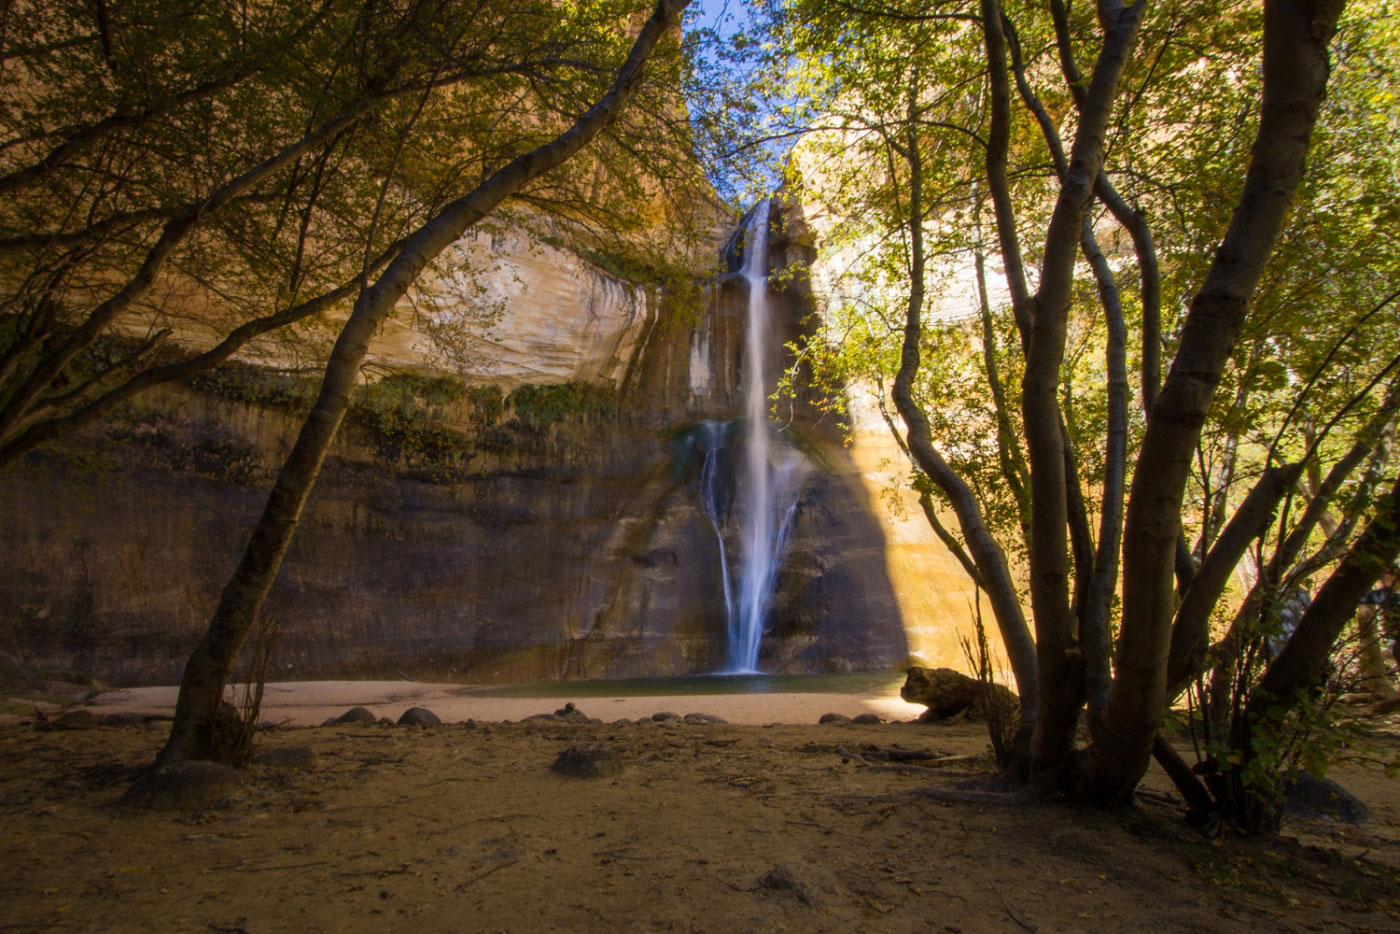 Hike Lower Calf Creek Falls in Grand Staircase - Escalante National Monument, Utah - Stav is Lost